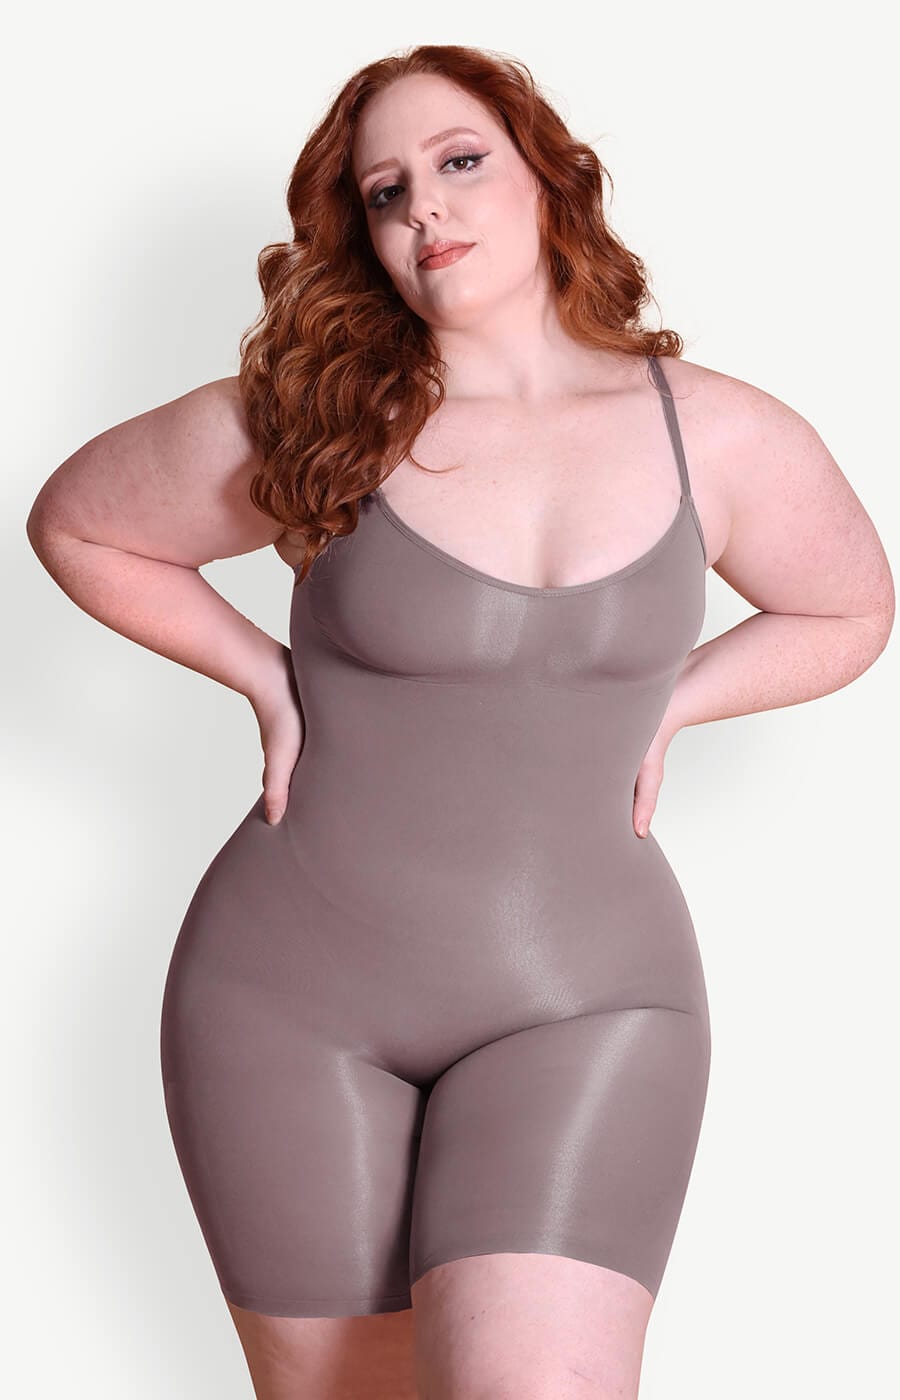 Seamless Triple Control Ladies Body Shaper Underwear For Women Thigh  Slimmer With Tummy Control In Sizes S, M, L From Eyeswellsummer, $10.65